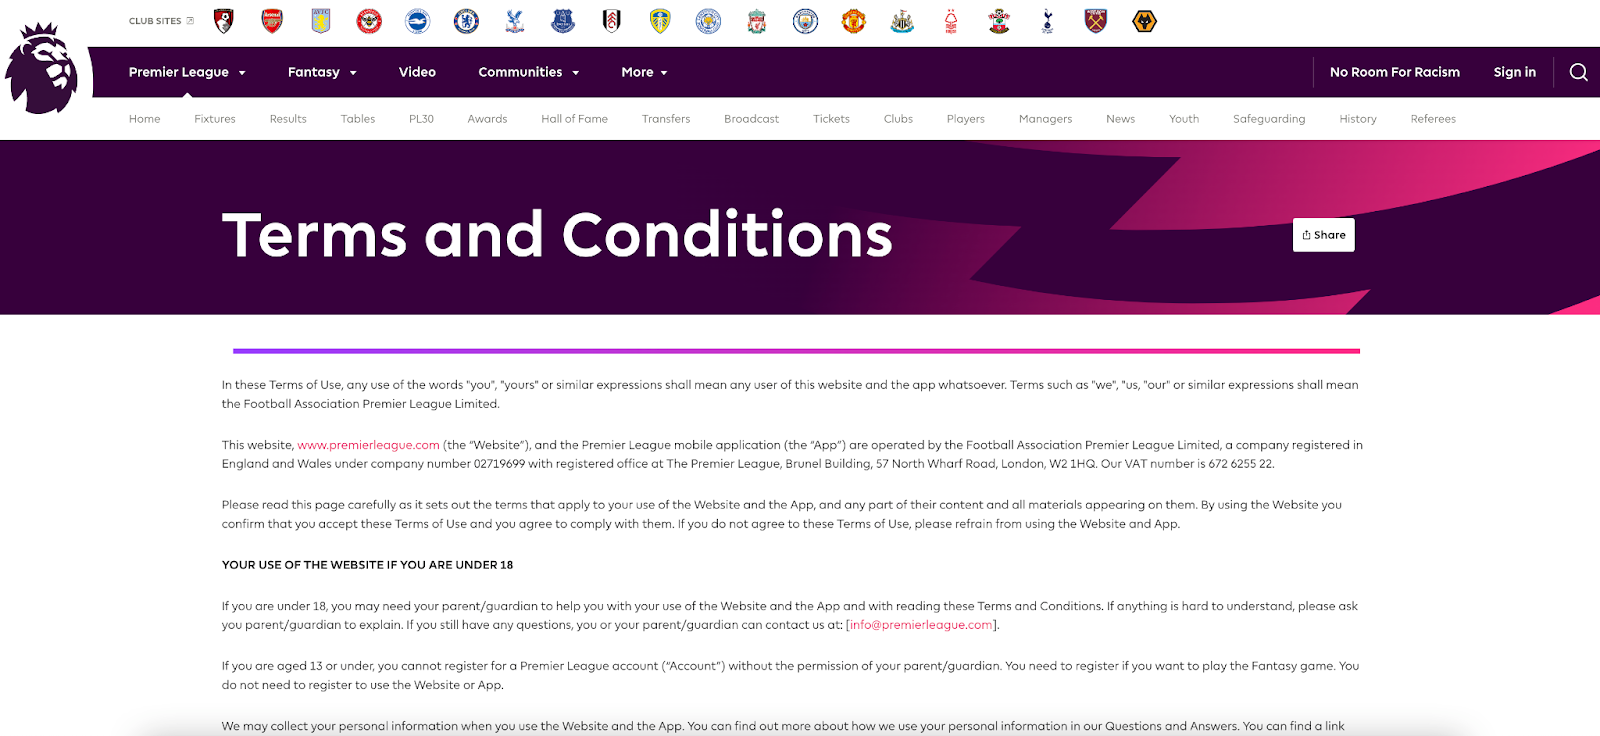 terms and conditions example for the premier league